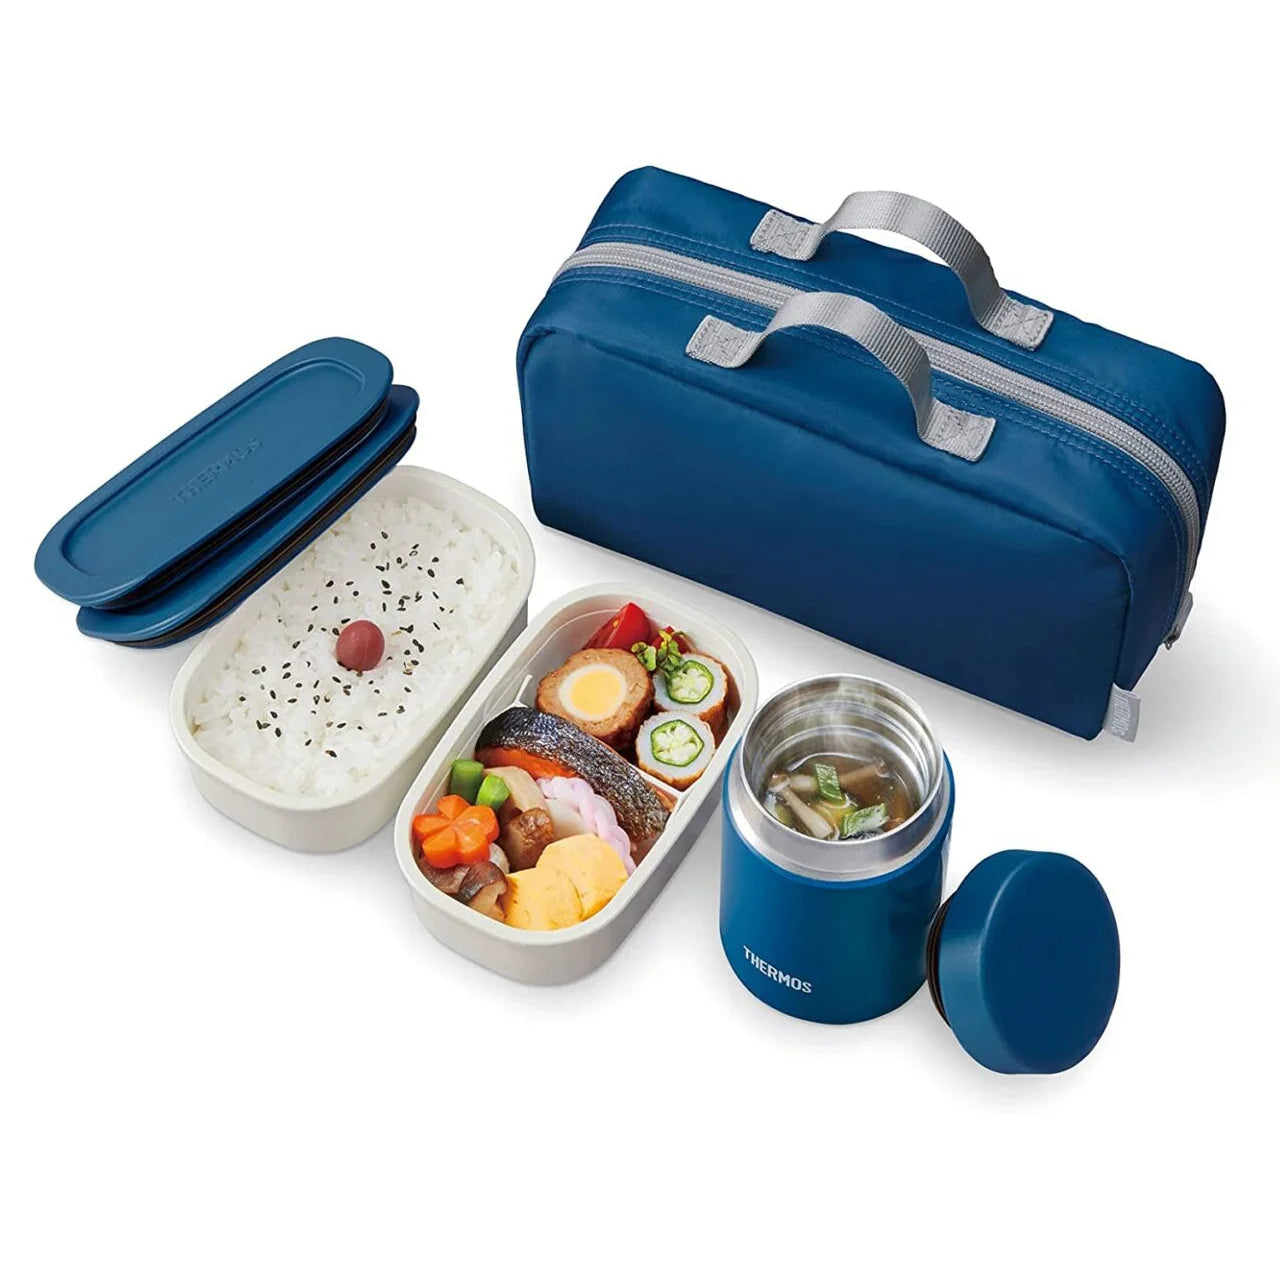 Thermos' Insulated Food Containers